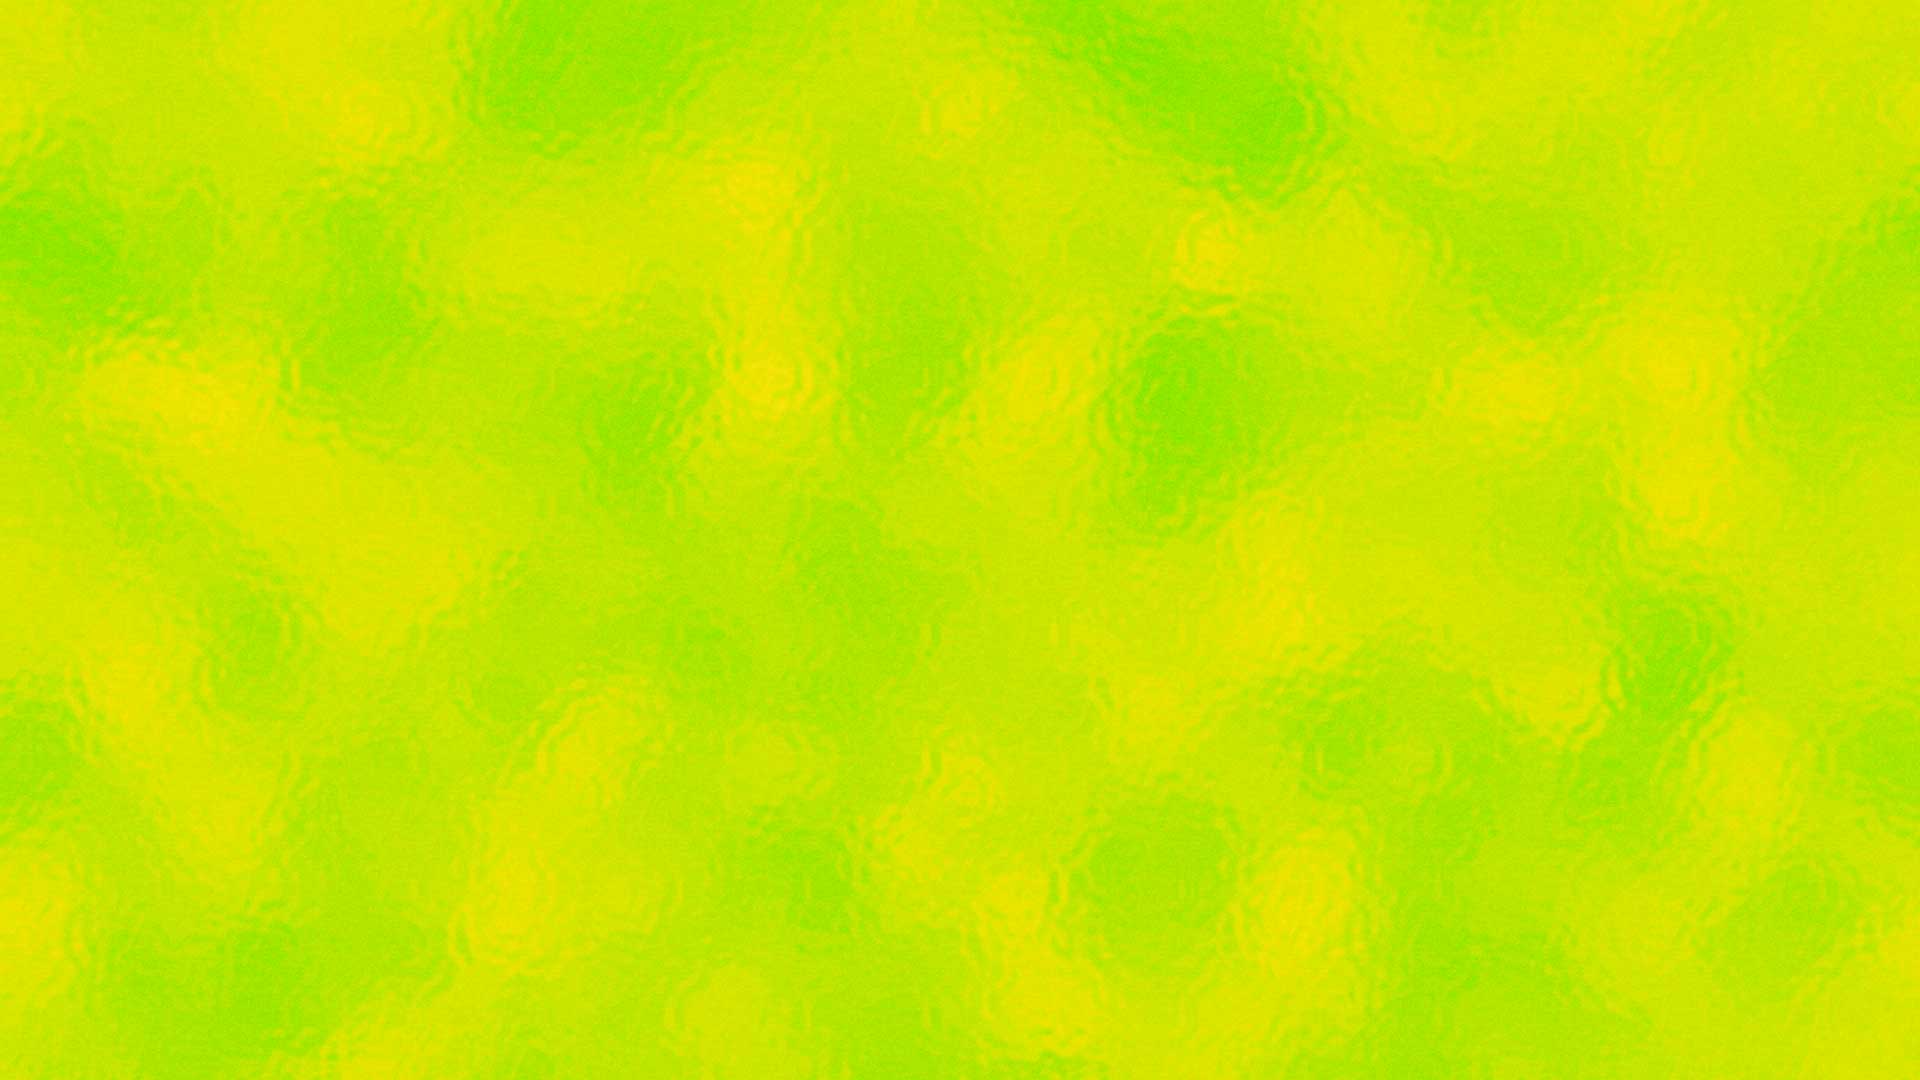 Cool Lime Green Backgrounds wwwgalleryhipcom   The